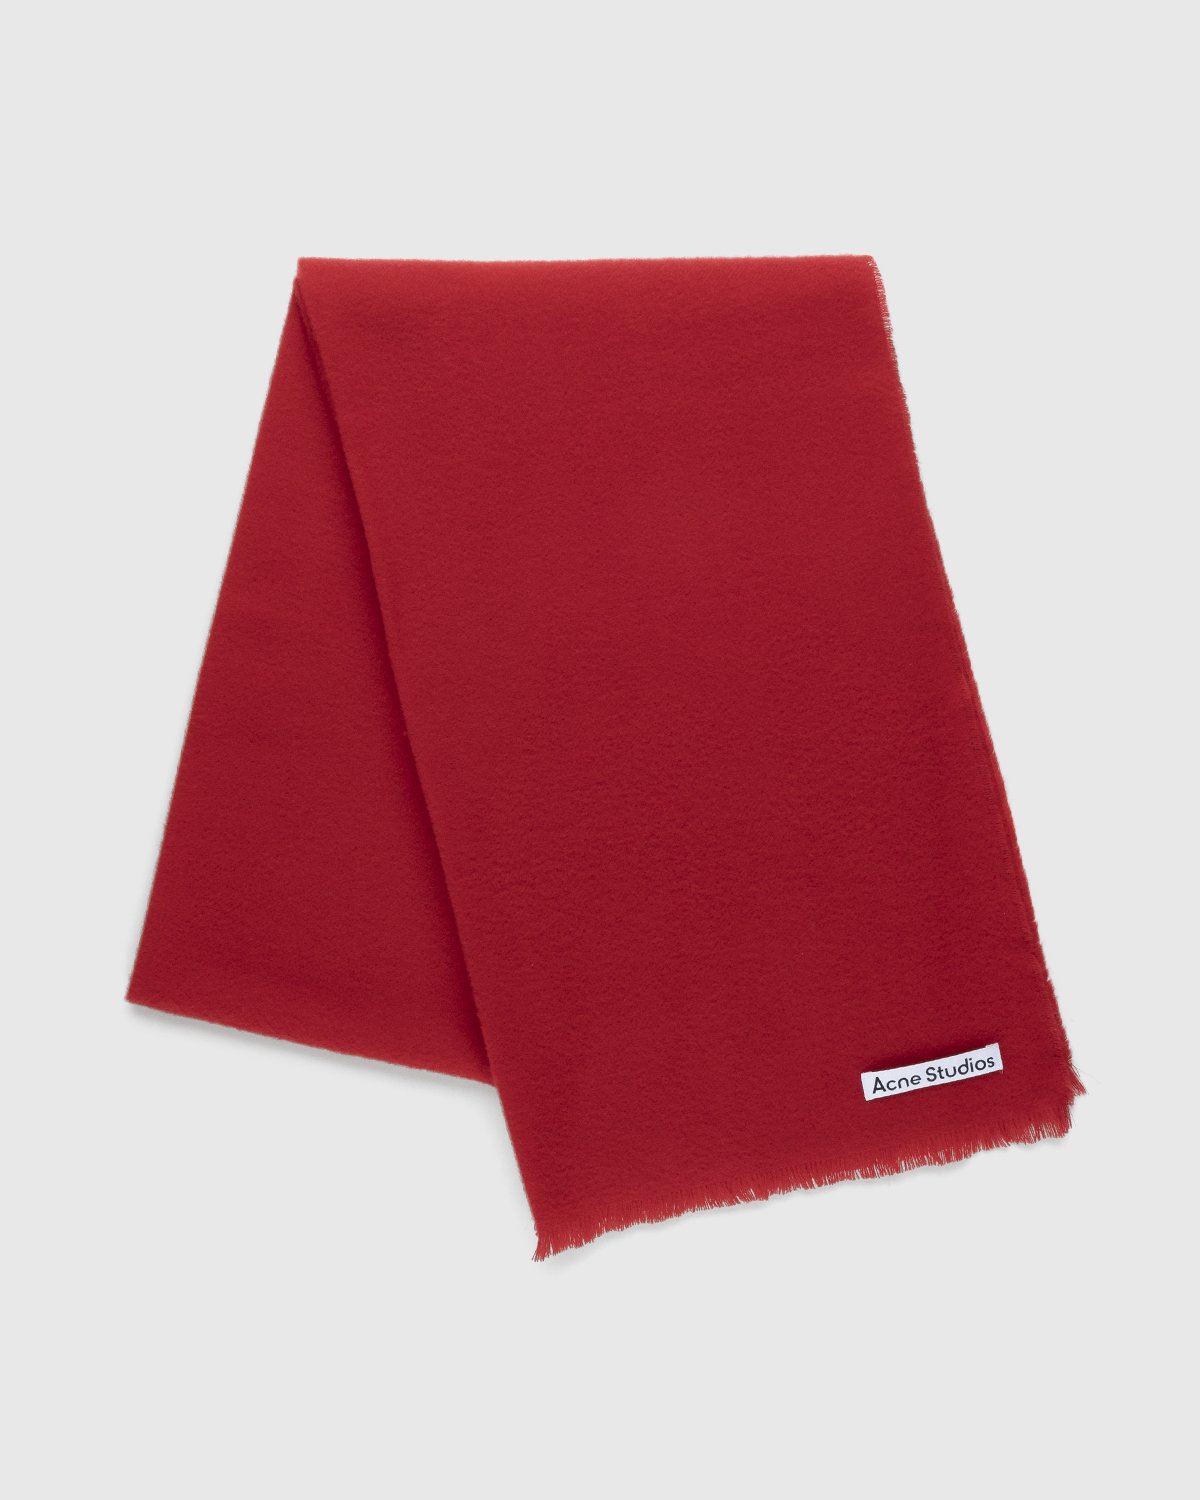 Acne Studios - Heavy Scarf Red - Accessories - Red - Image 1